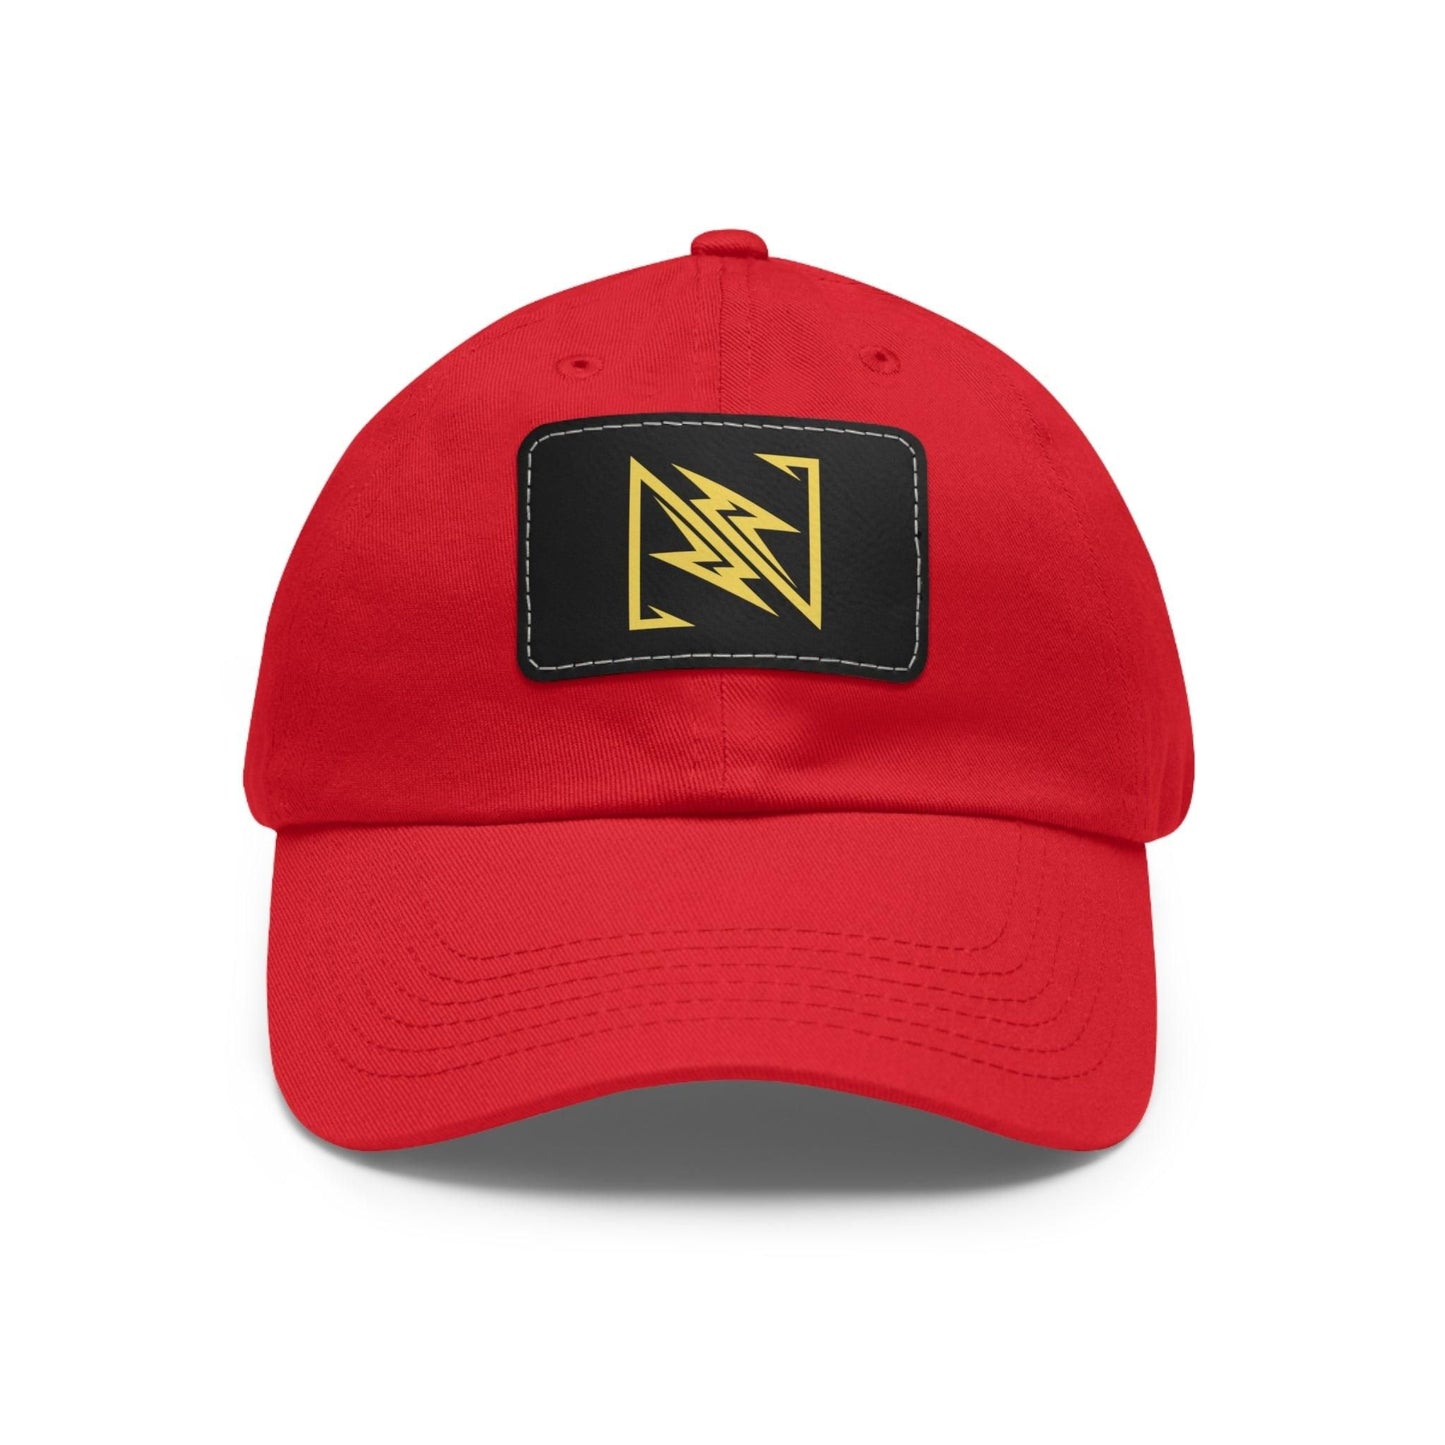 NX Vogue Premium Baseball Hat with Leather Patch Cap Red / Black patch Rectangle One size